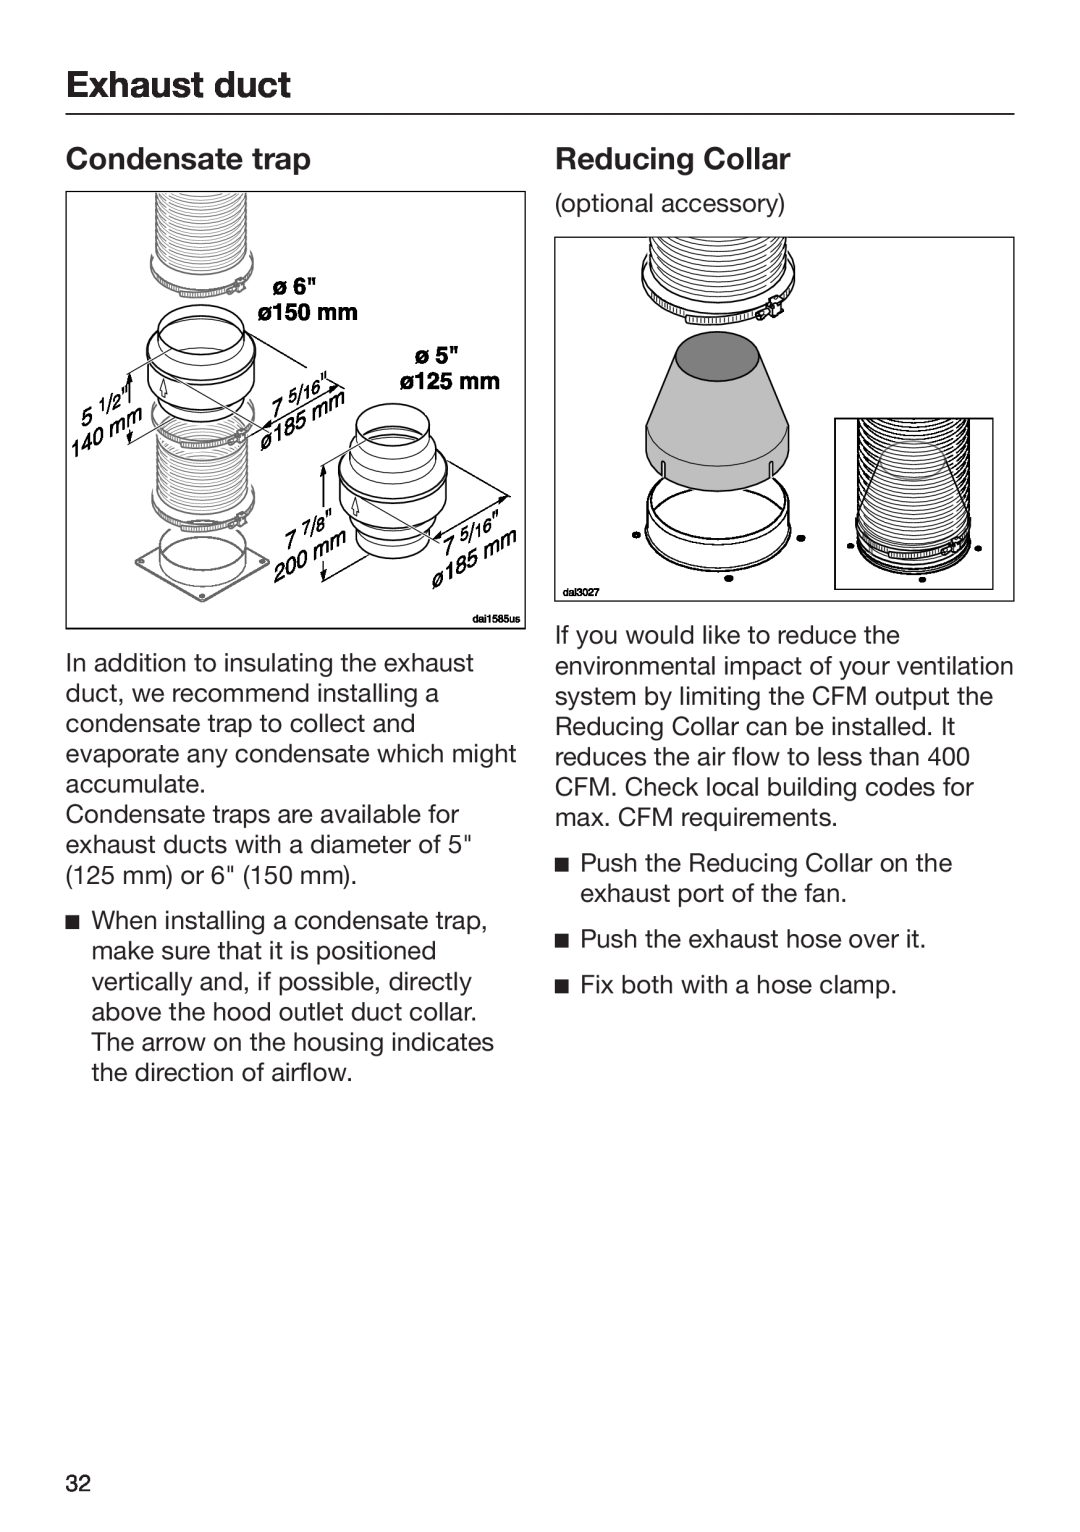 Miele 09 968 240 installation instructions Condensate trap, Reducing Collar, Exhaust duct 